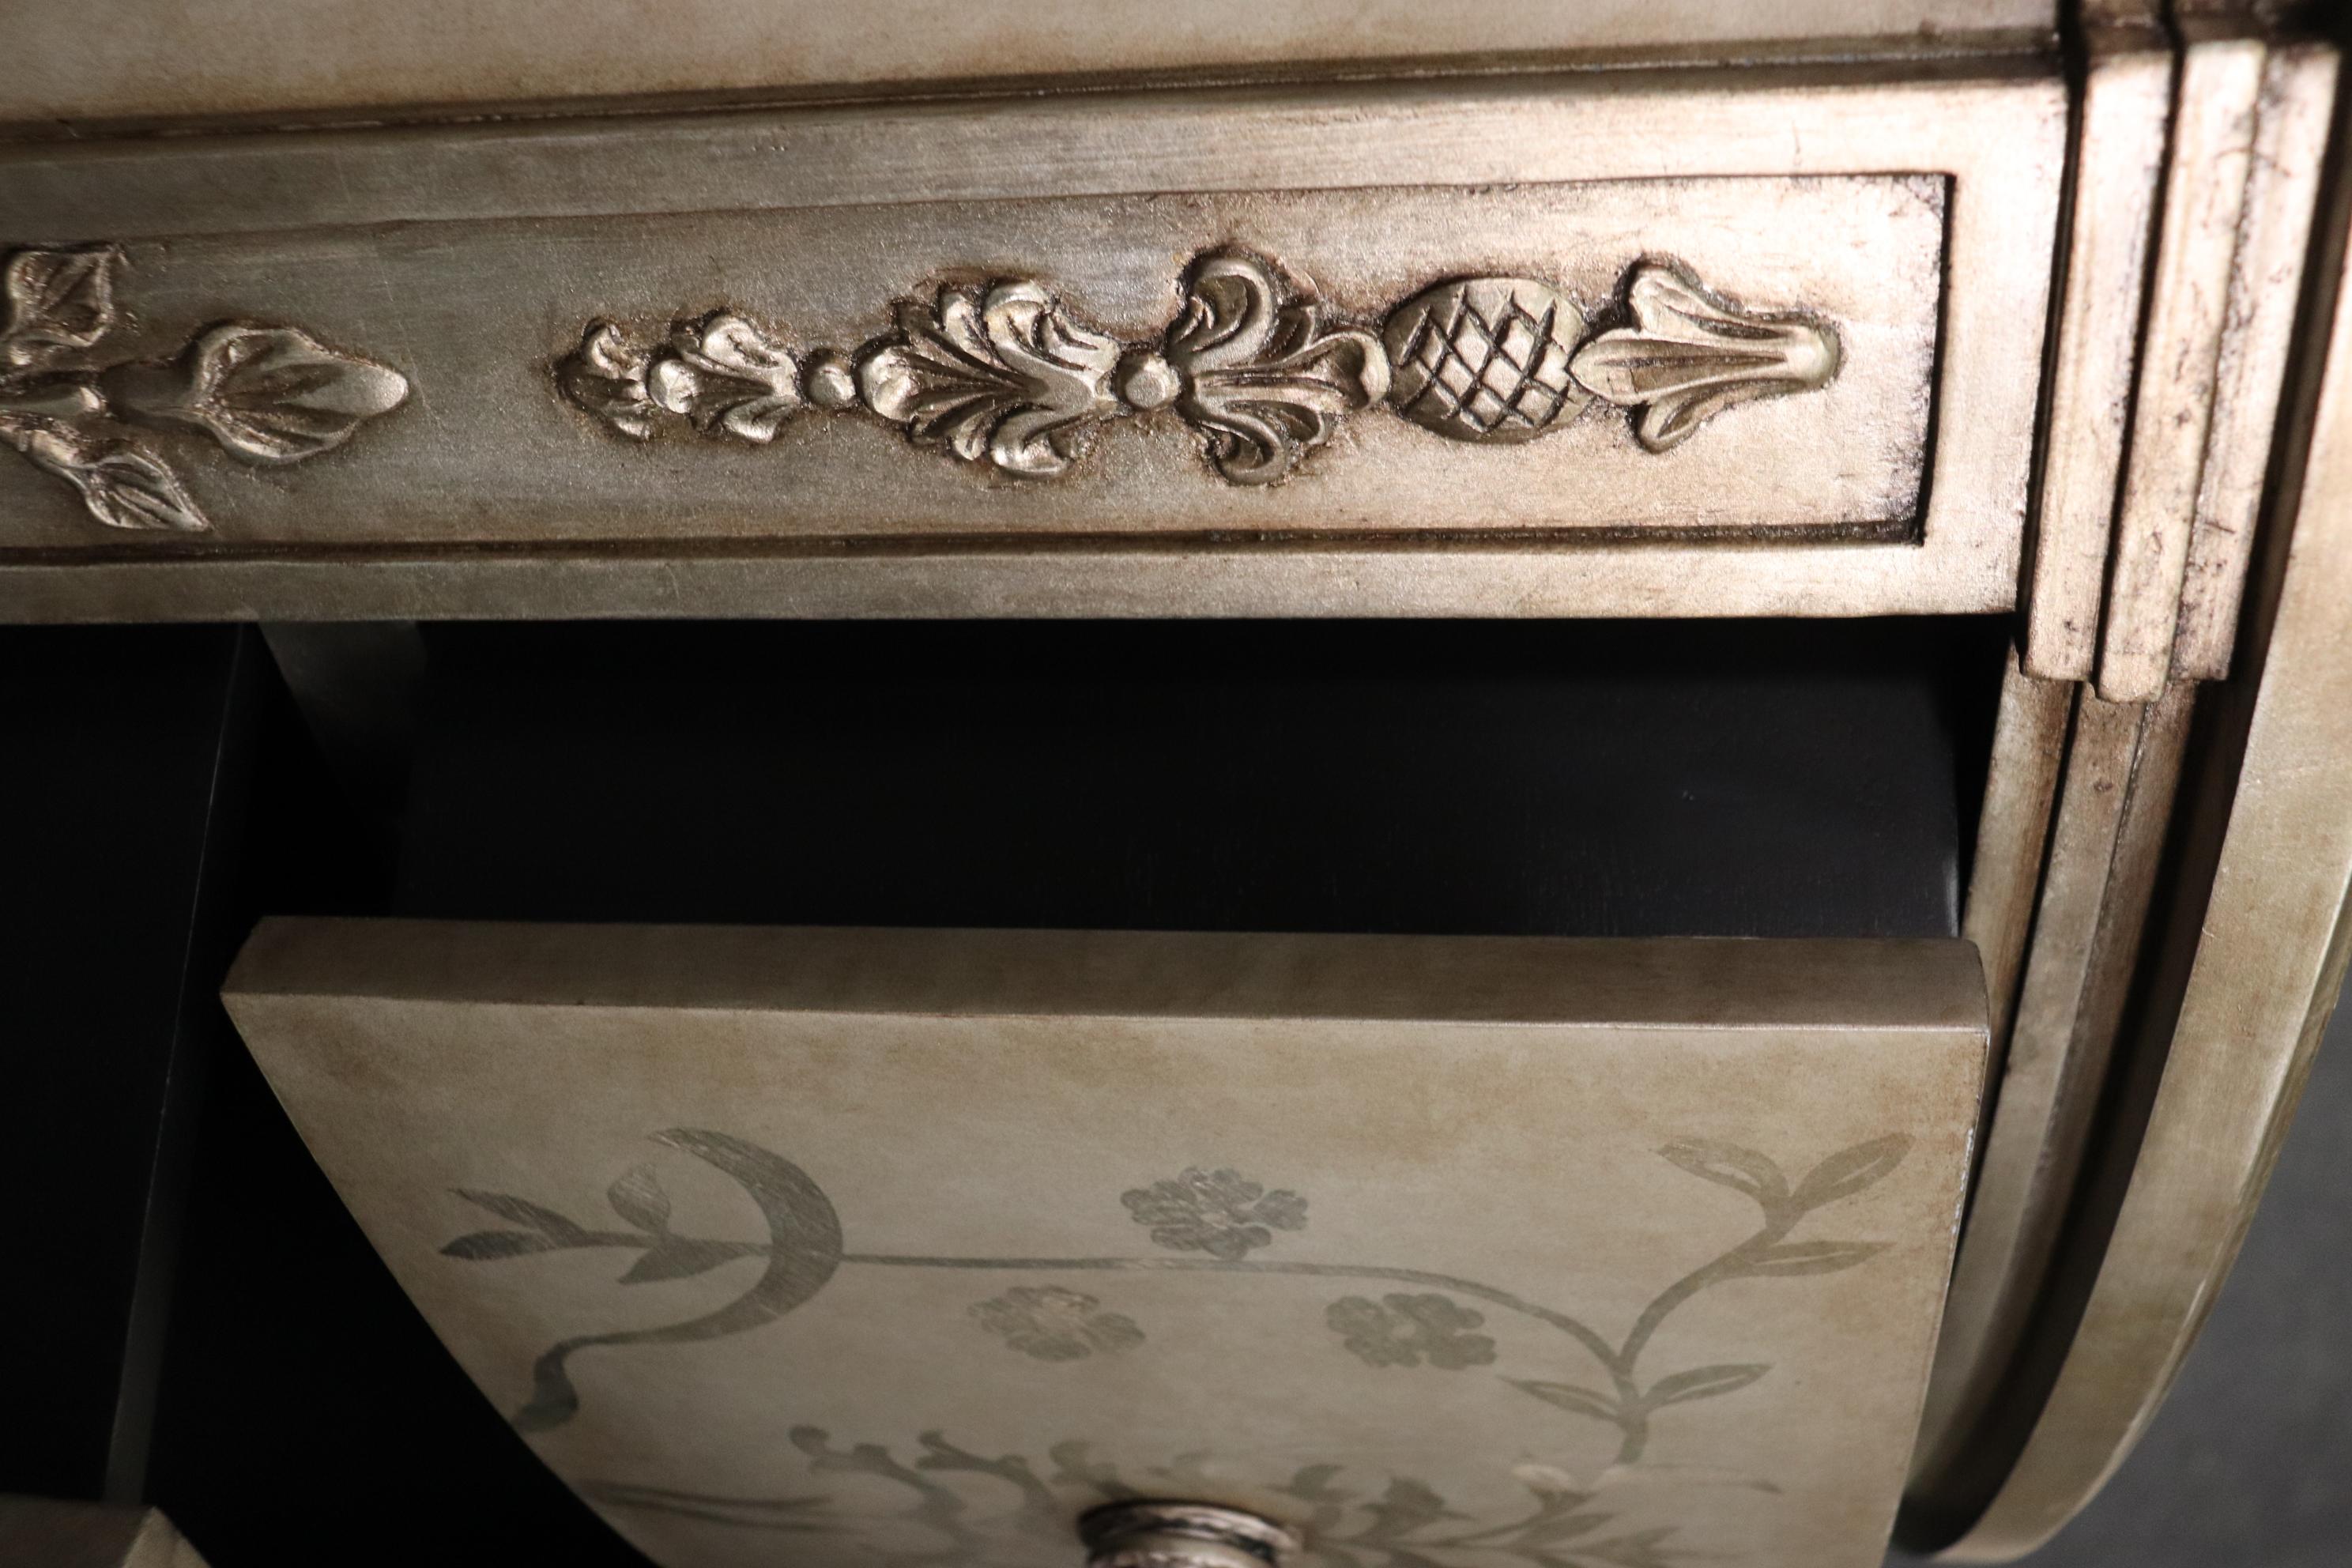 Beech Lillian August Silver Leaf Continental Style Commode Foyer Chest Dresser